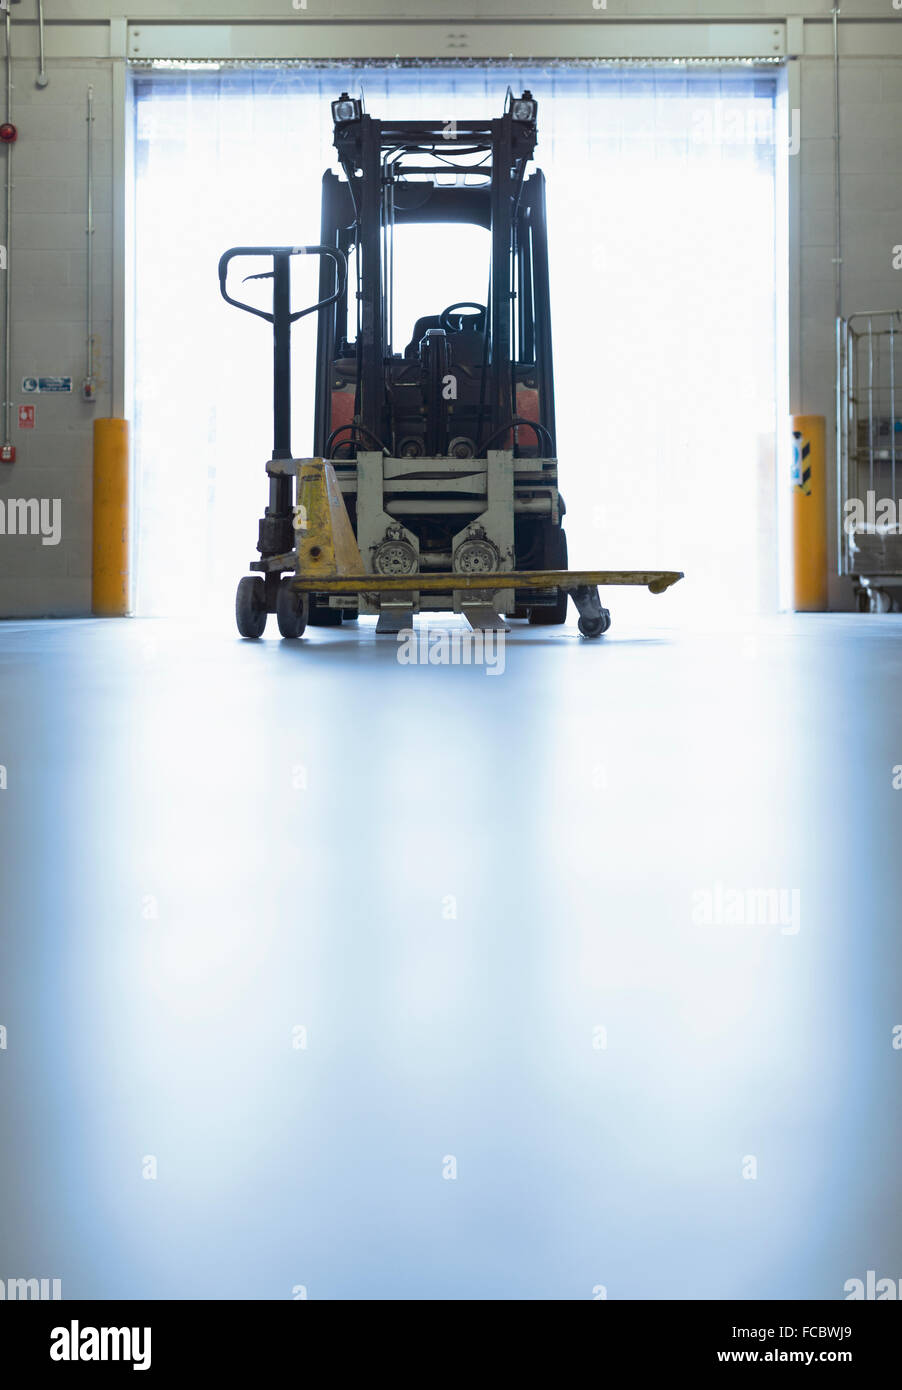 Forklift parked in warehouse loading dock doorway Stock Photo